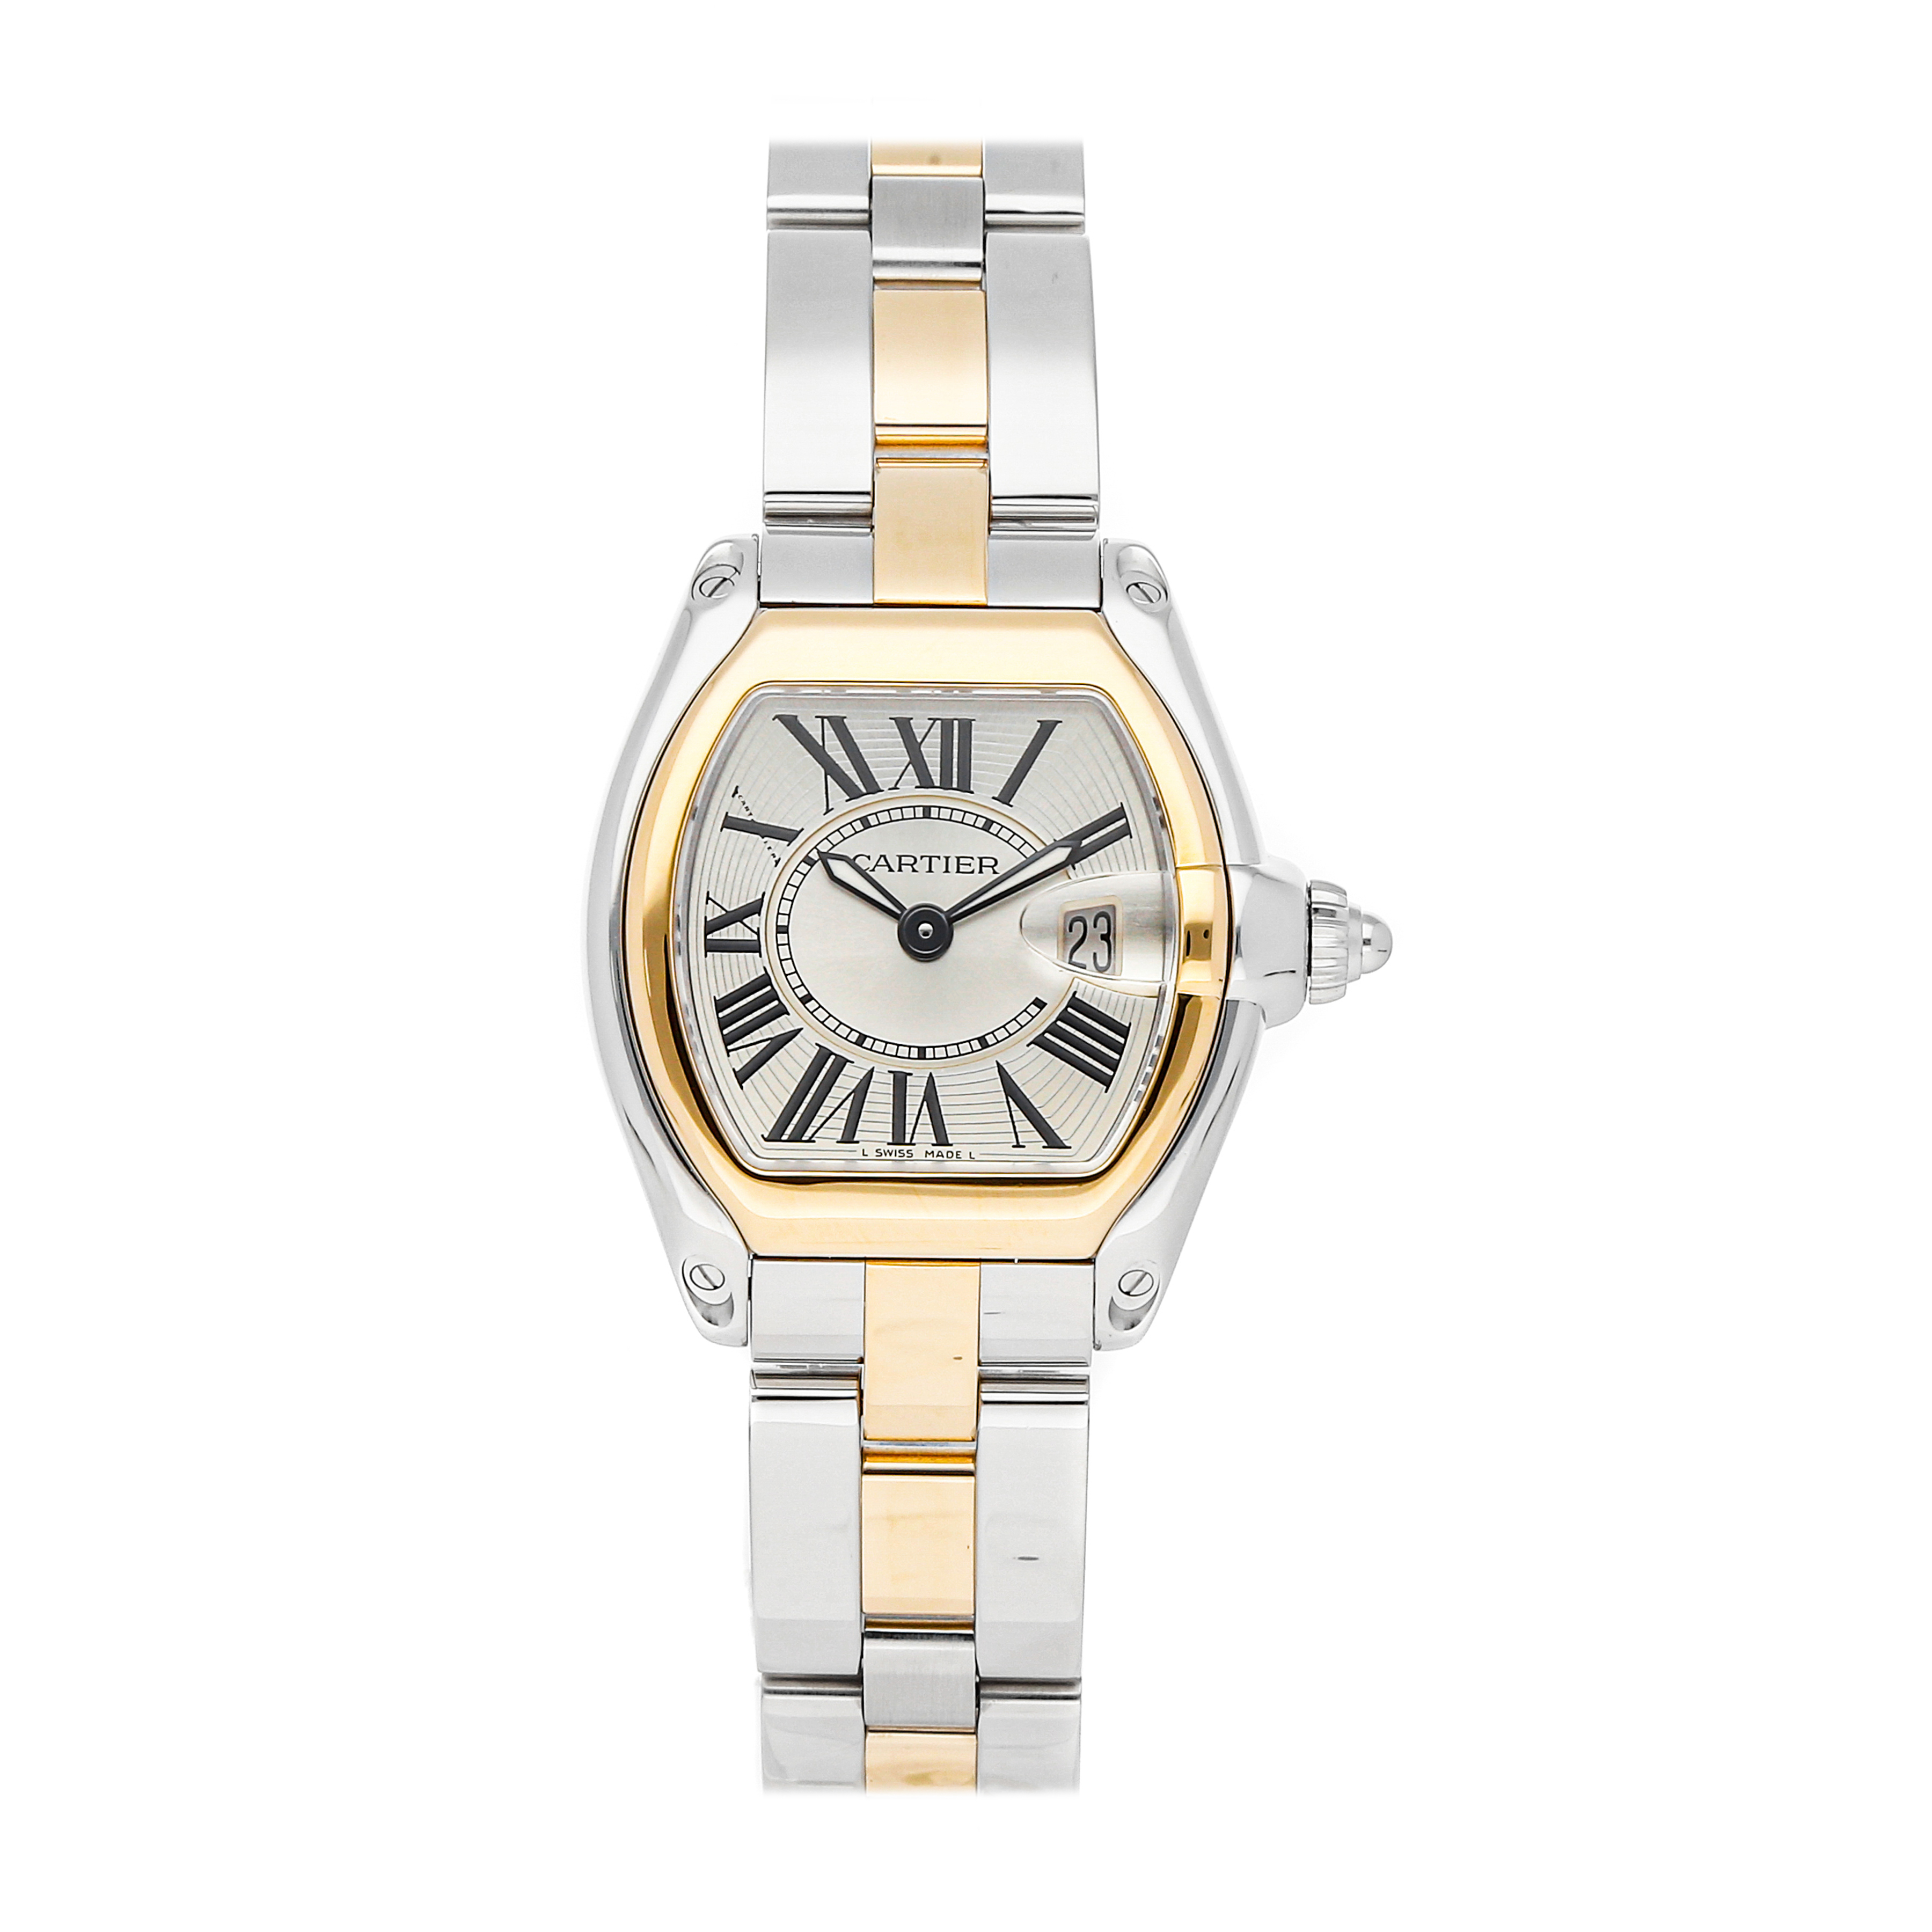 Certified Pre-Owned Cartier Roadster 